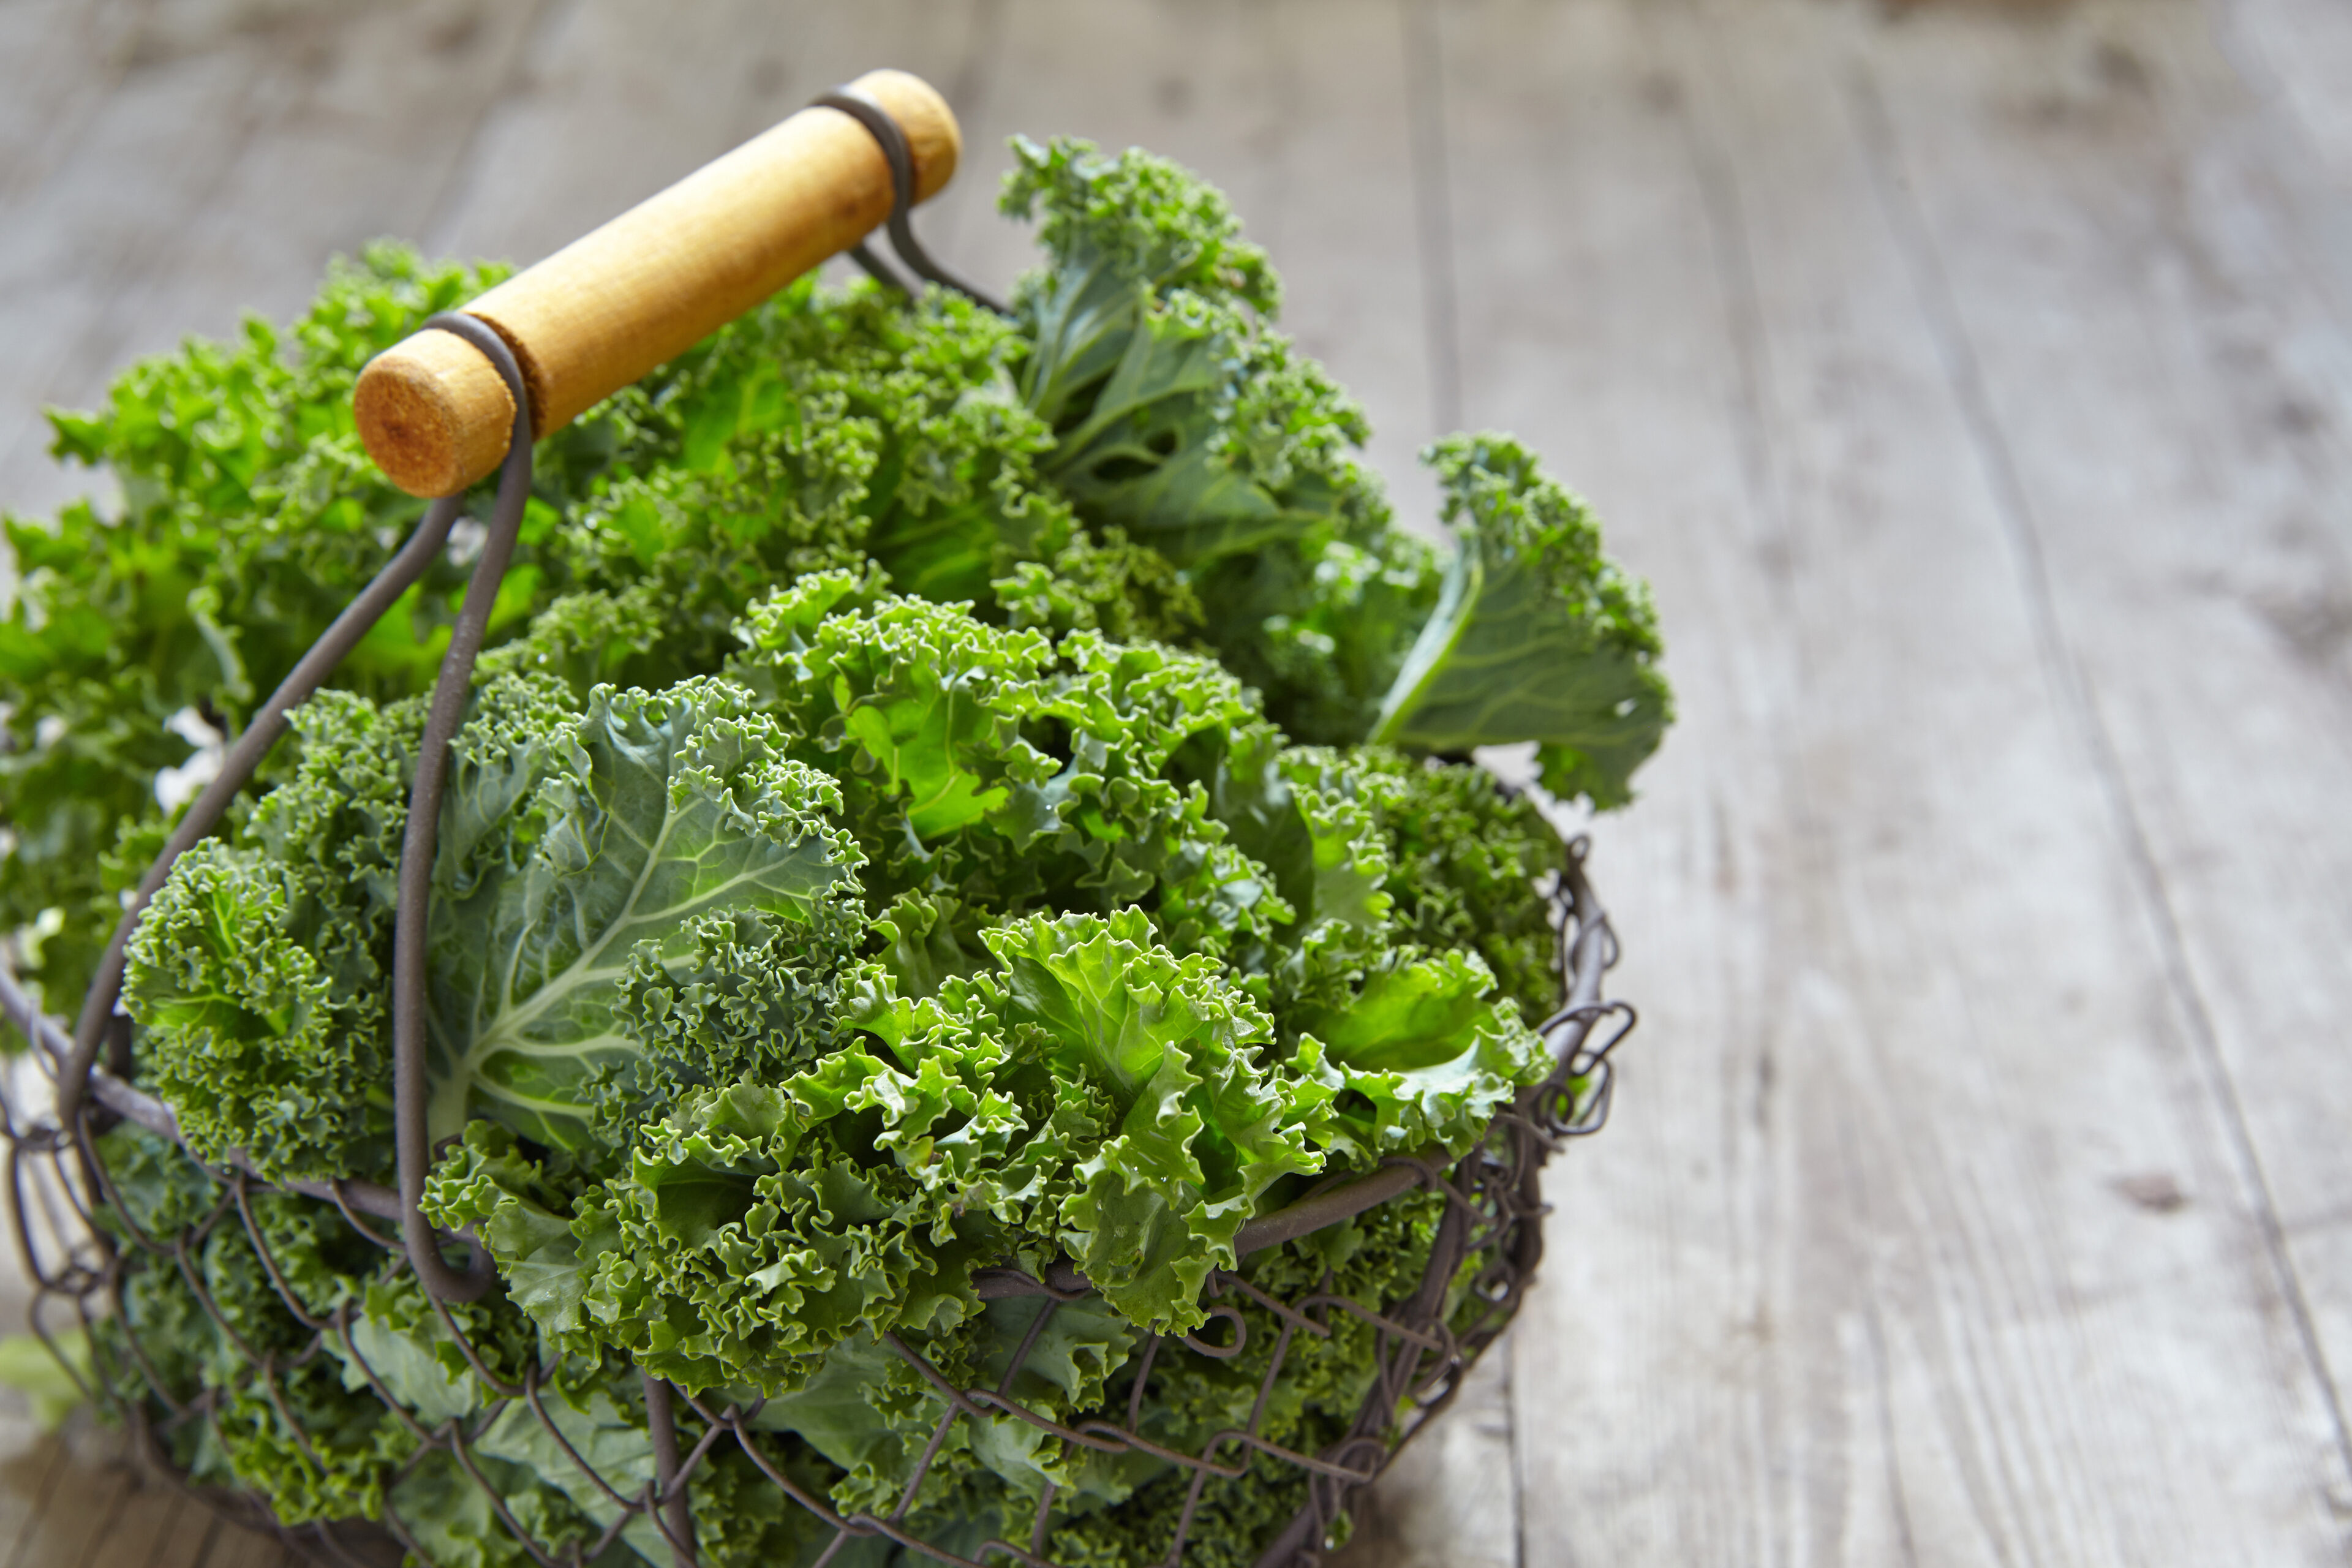 Kale: The nutrient-packed leafy green